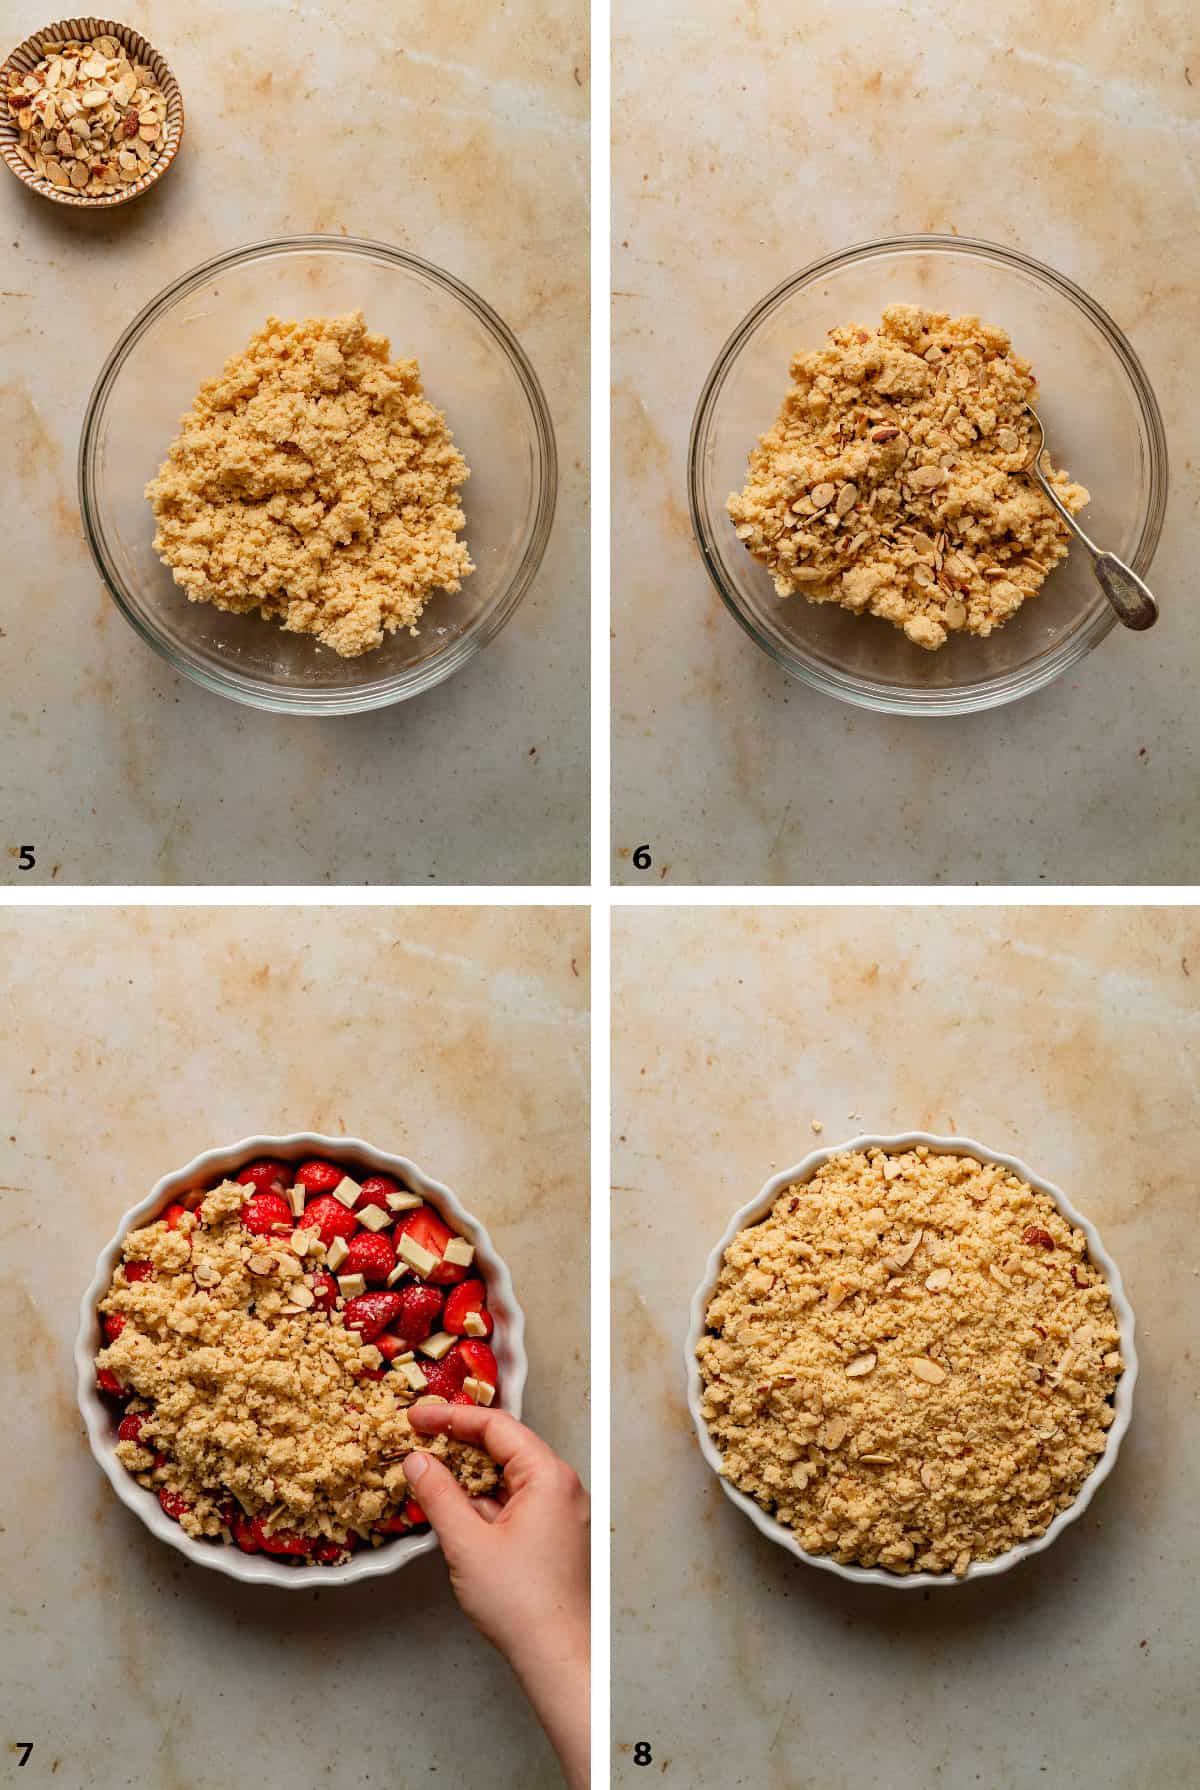 Process of finishing the crumble topping and layering on the topping on the strawberries.